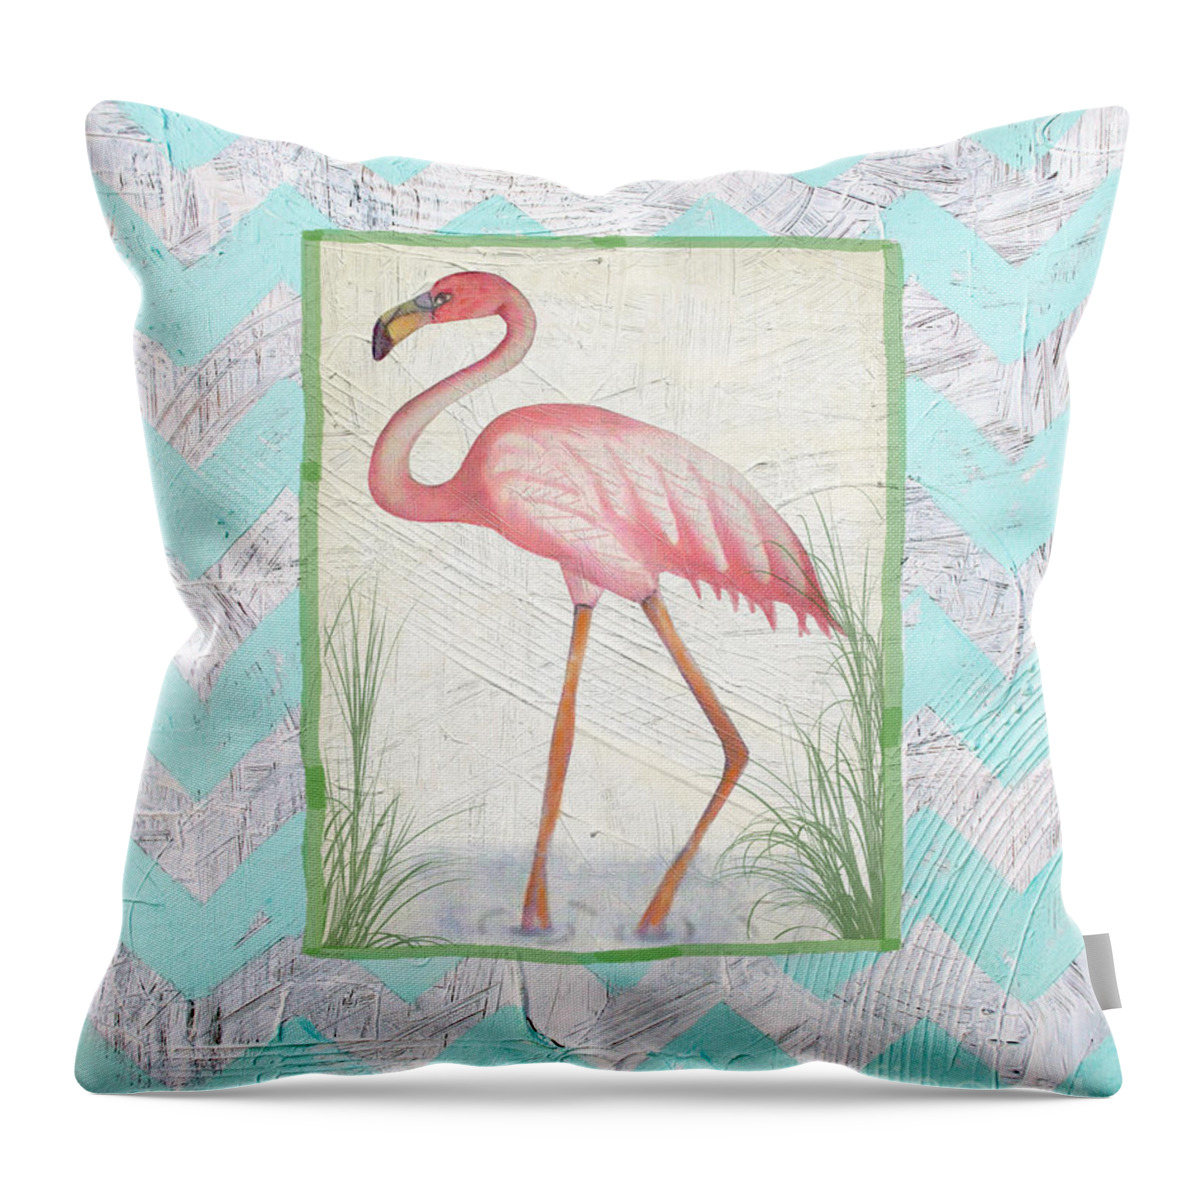 Jean Plout Throw Pillow featuring the painting Flamingo by Jean Plout